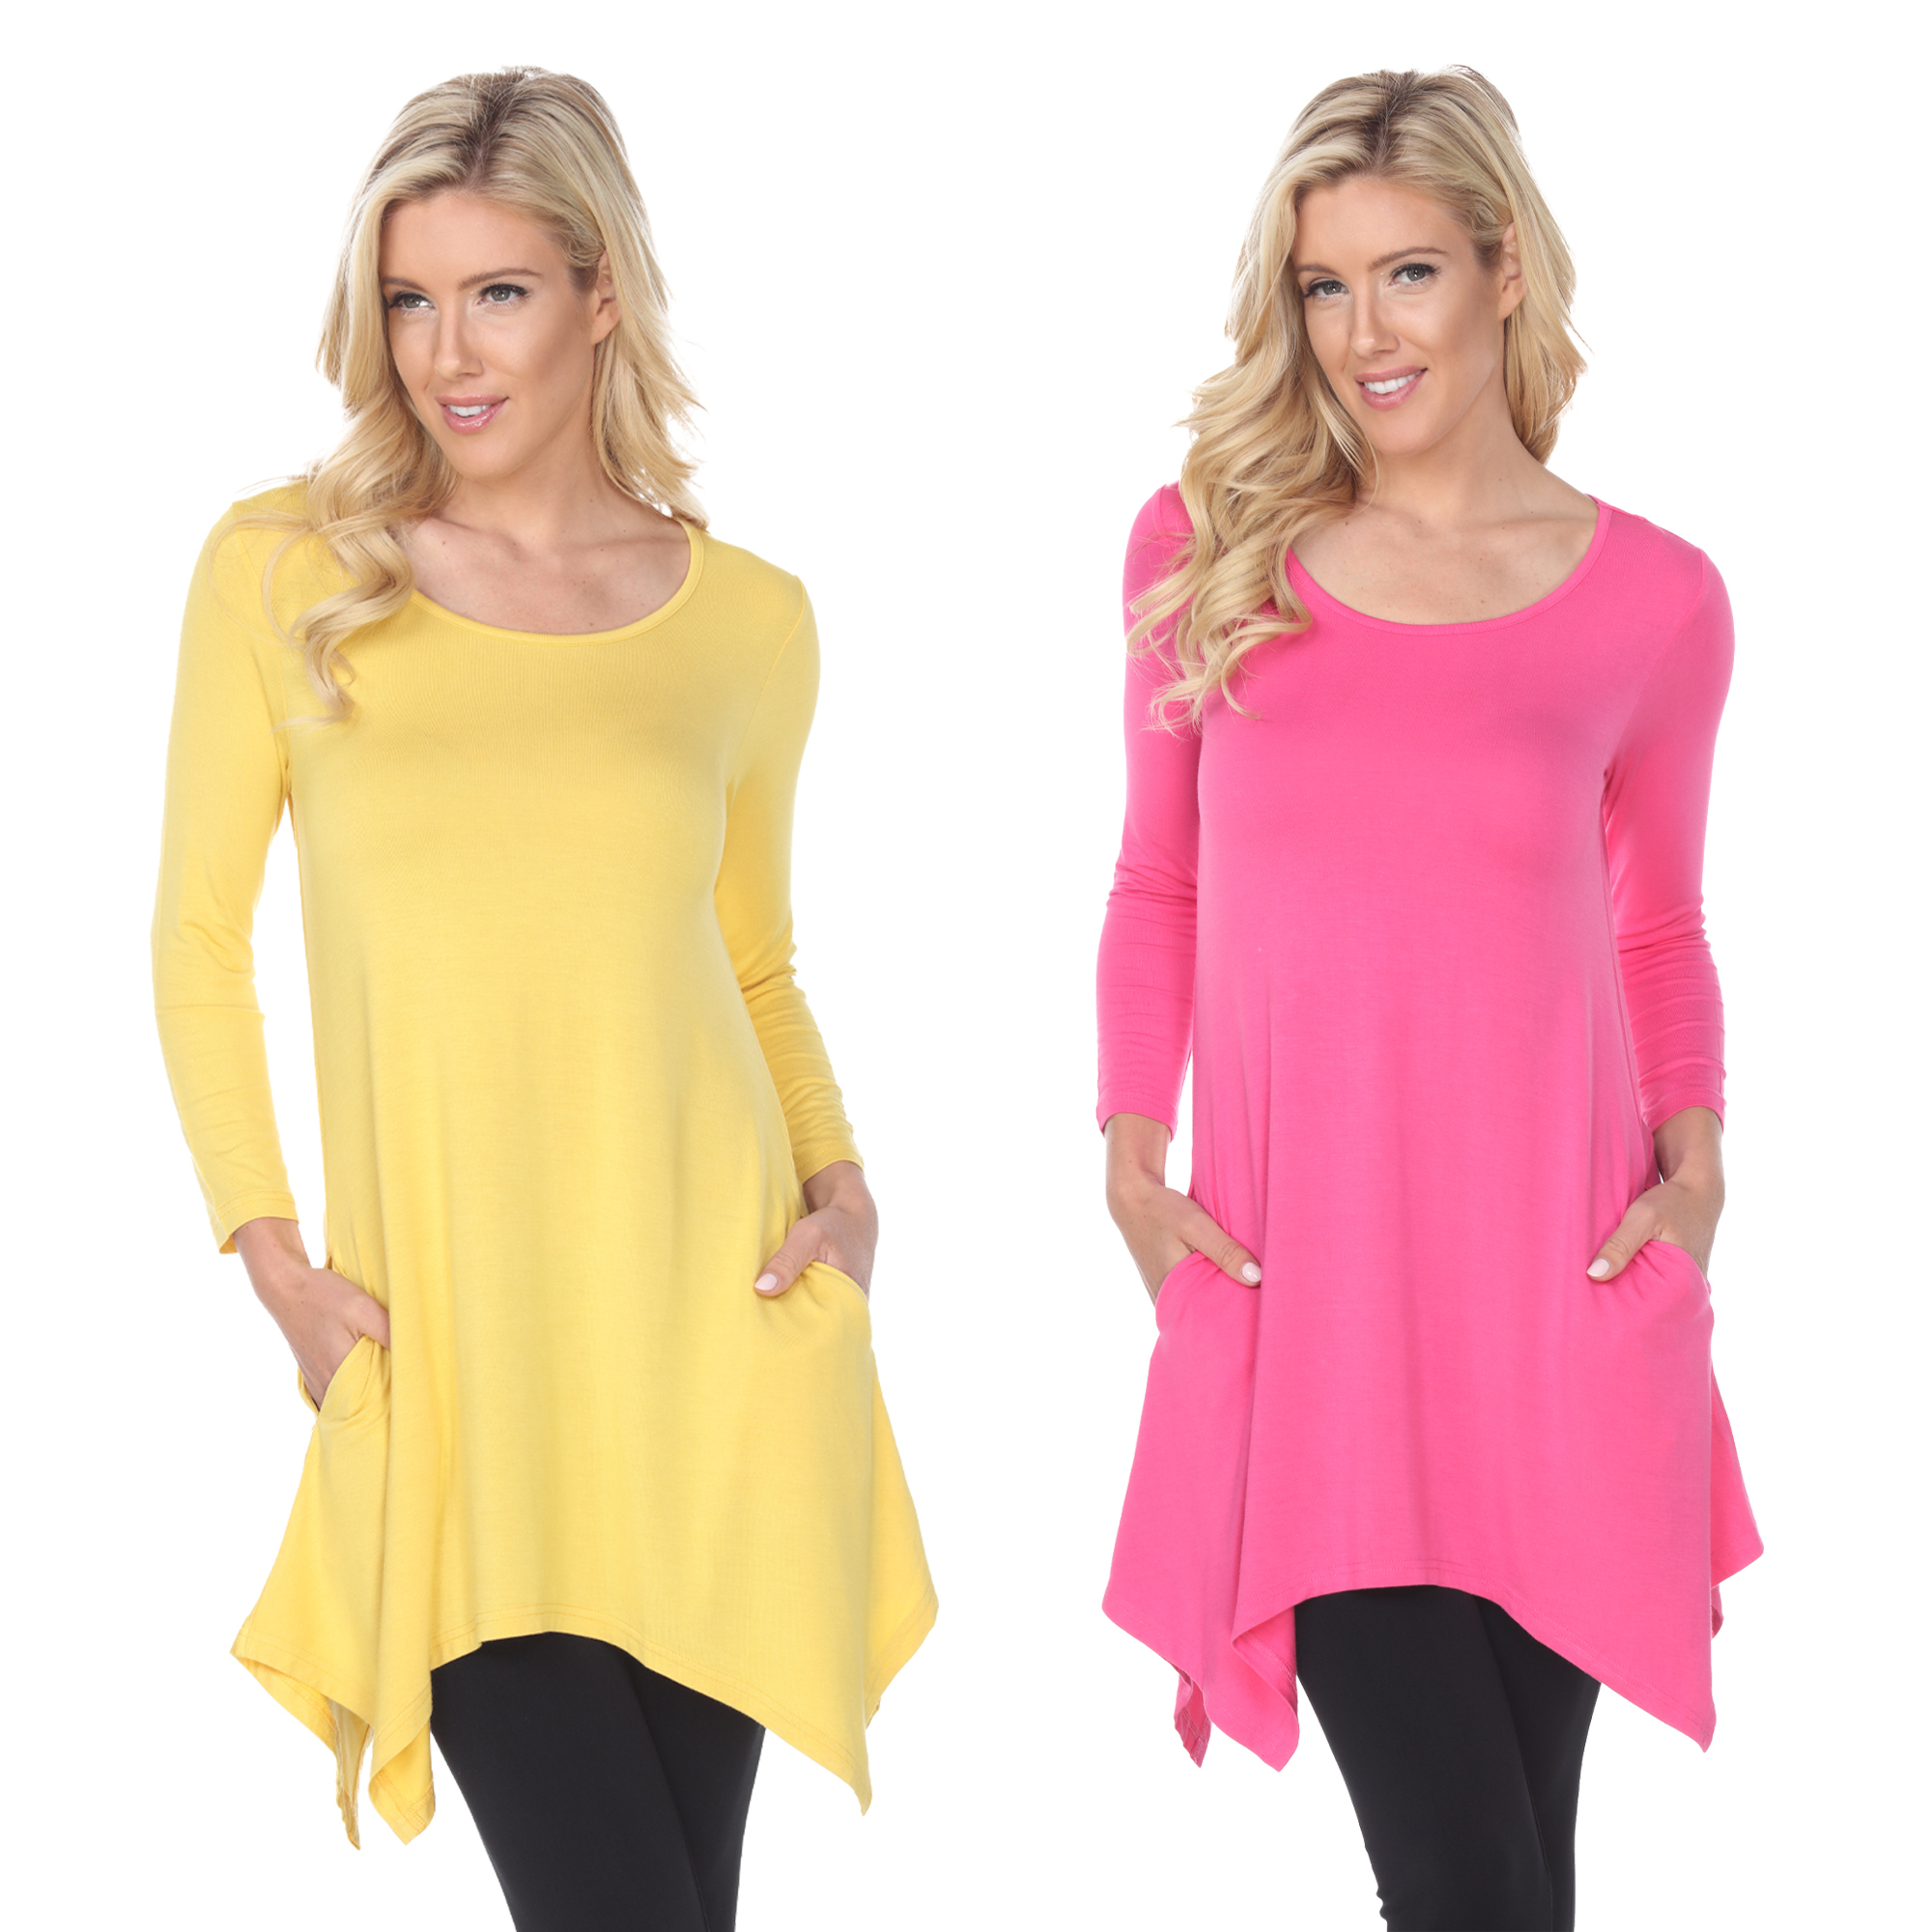 White Mark Women's Pack Of 2 Yellow Tunic Top - Yellow, Coral, Small